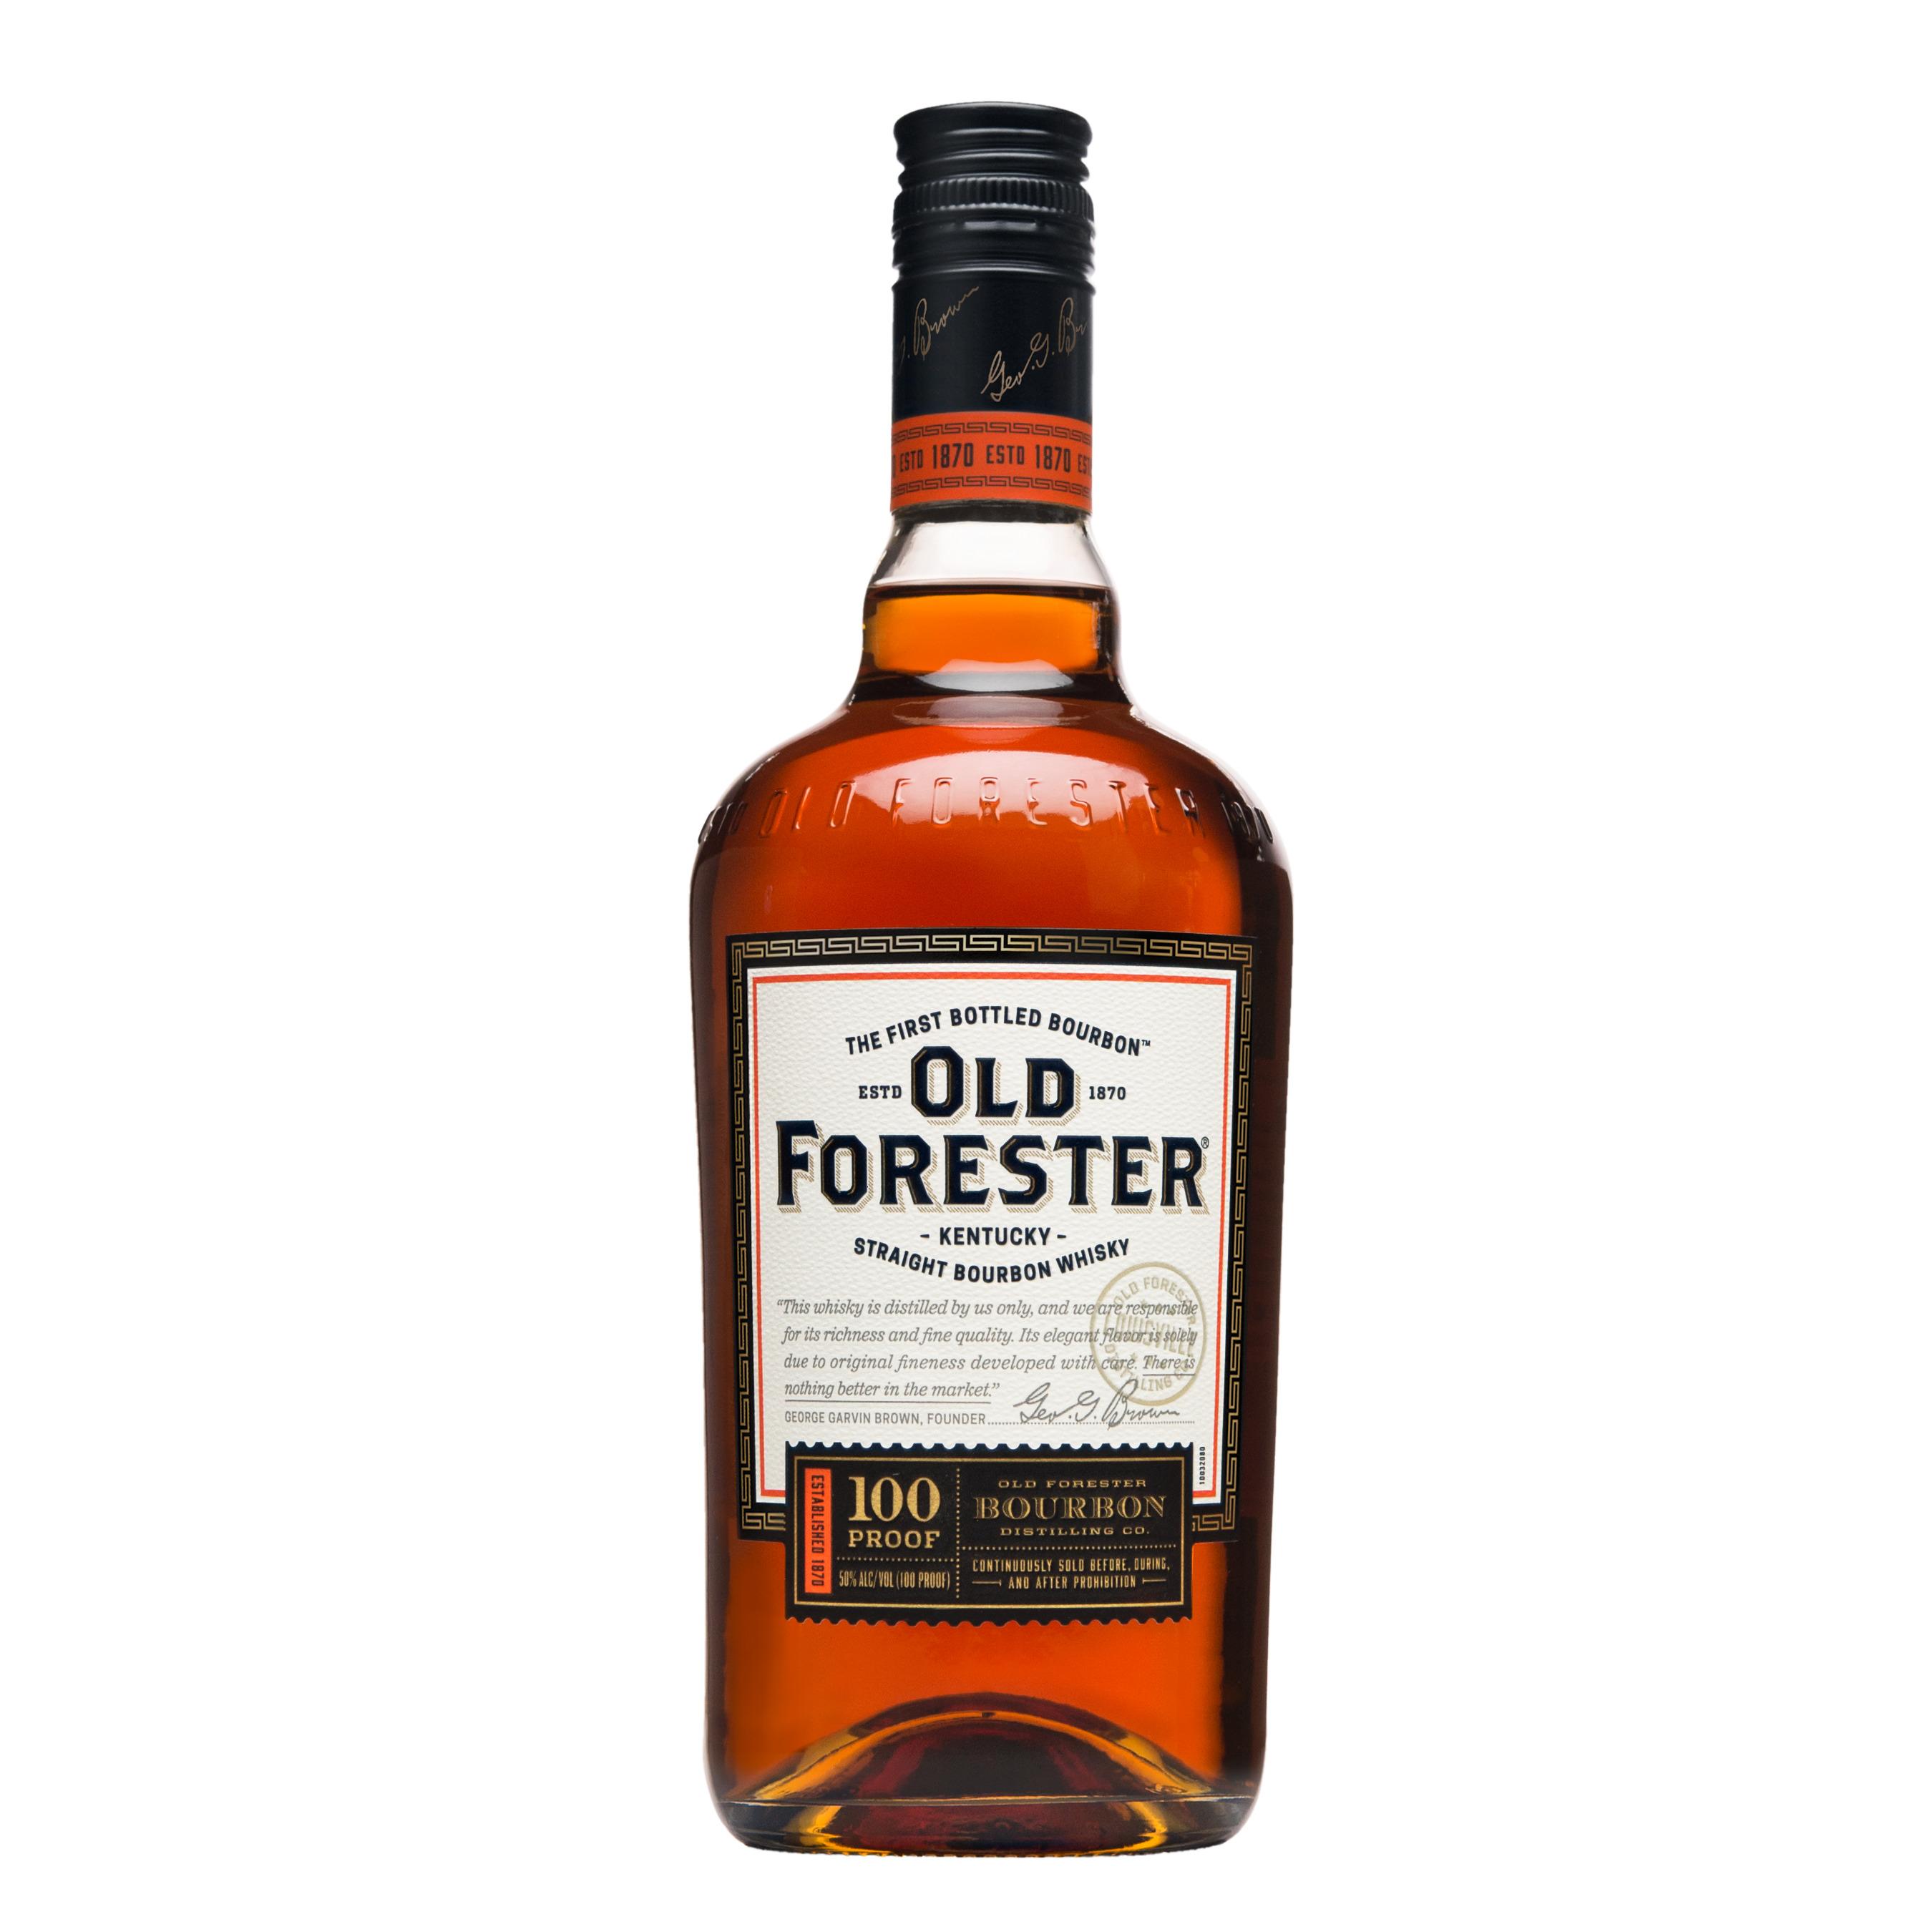 Old Forester 100 Proof Kentucky Straight Bourbon Whisky